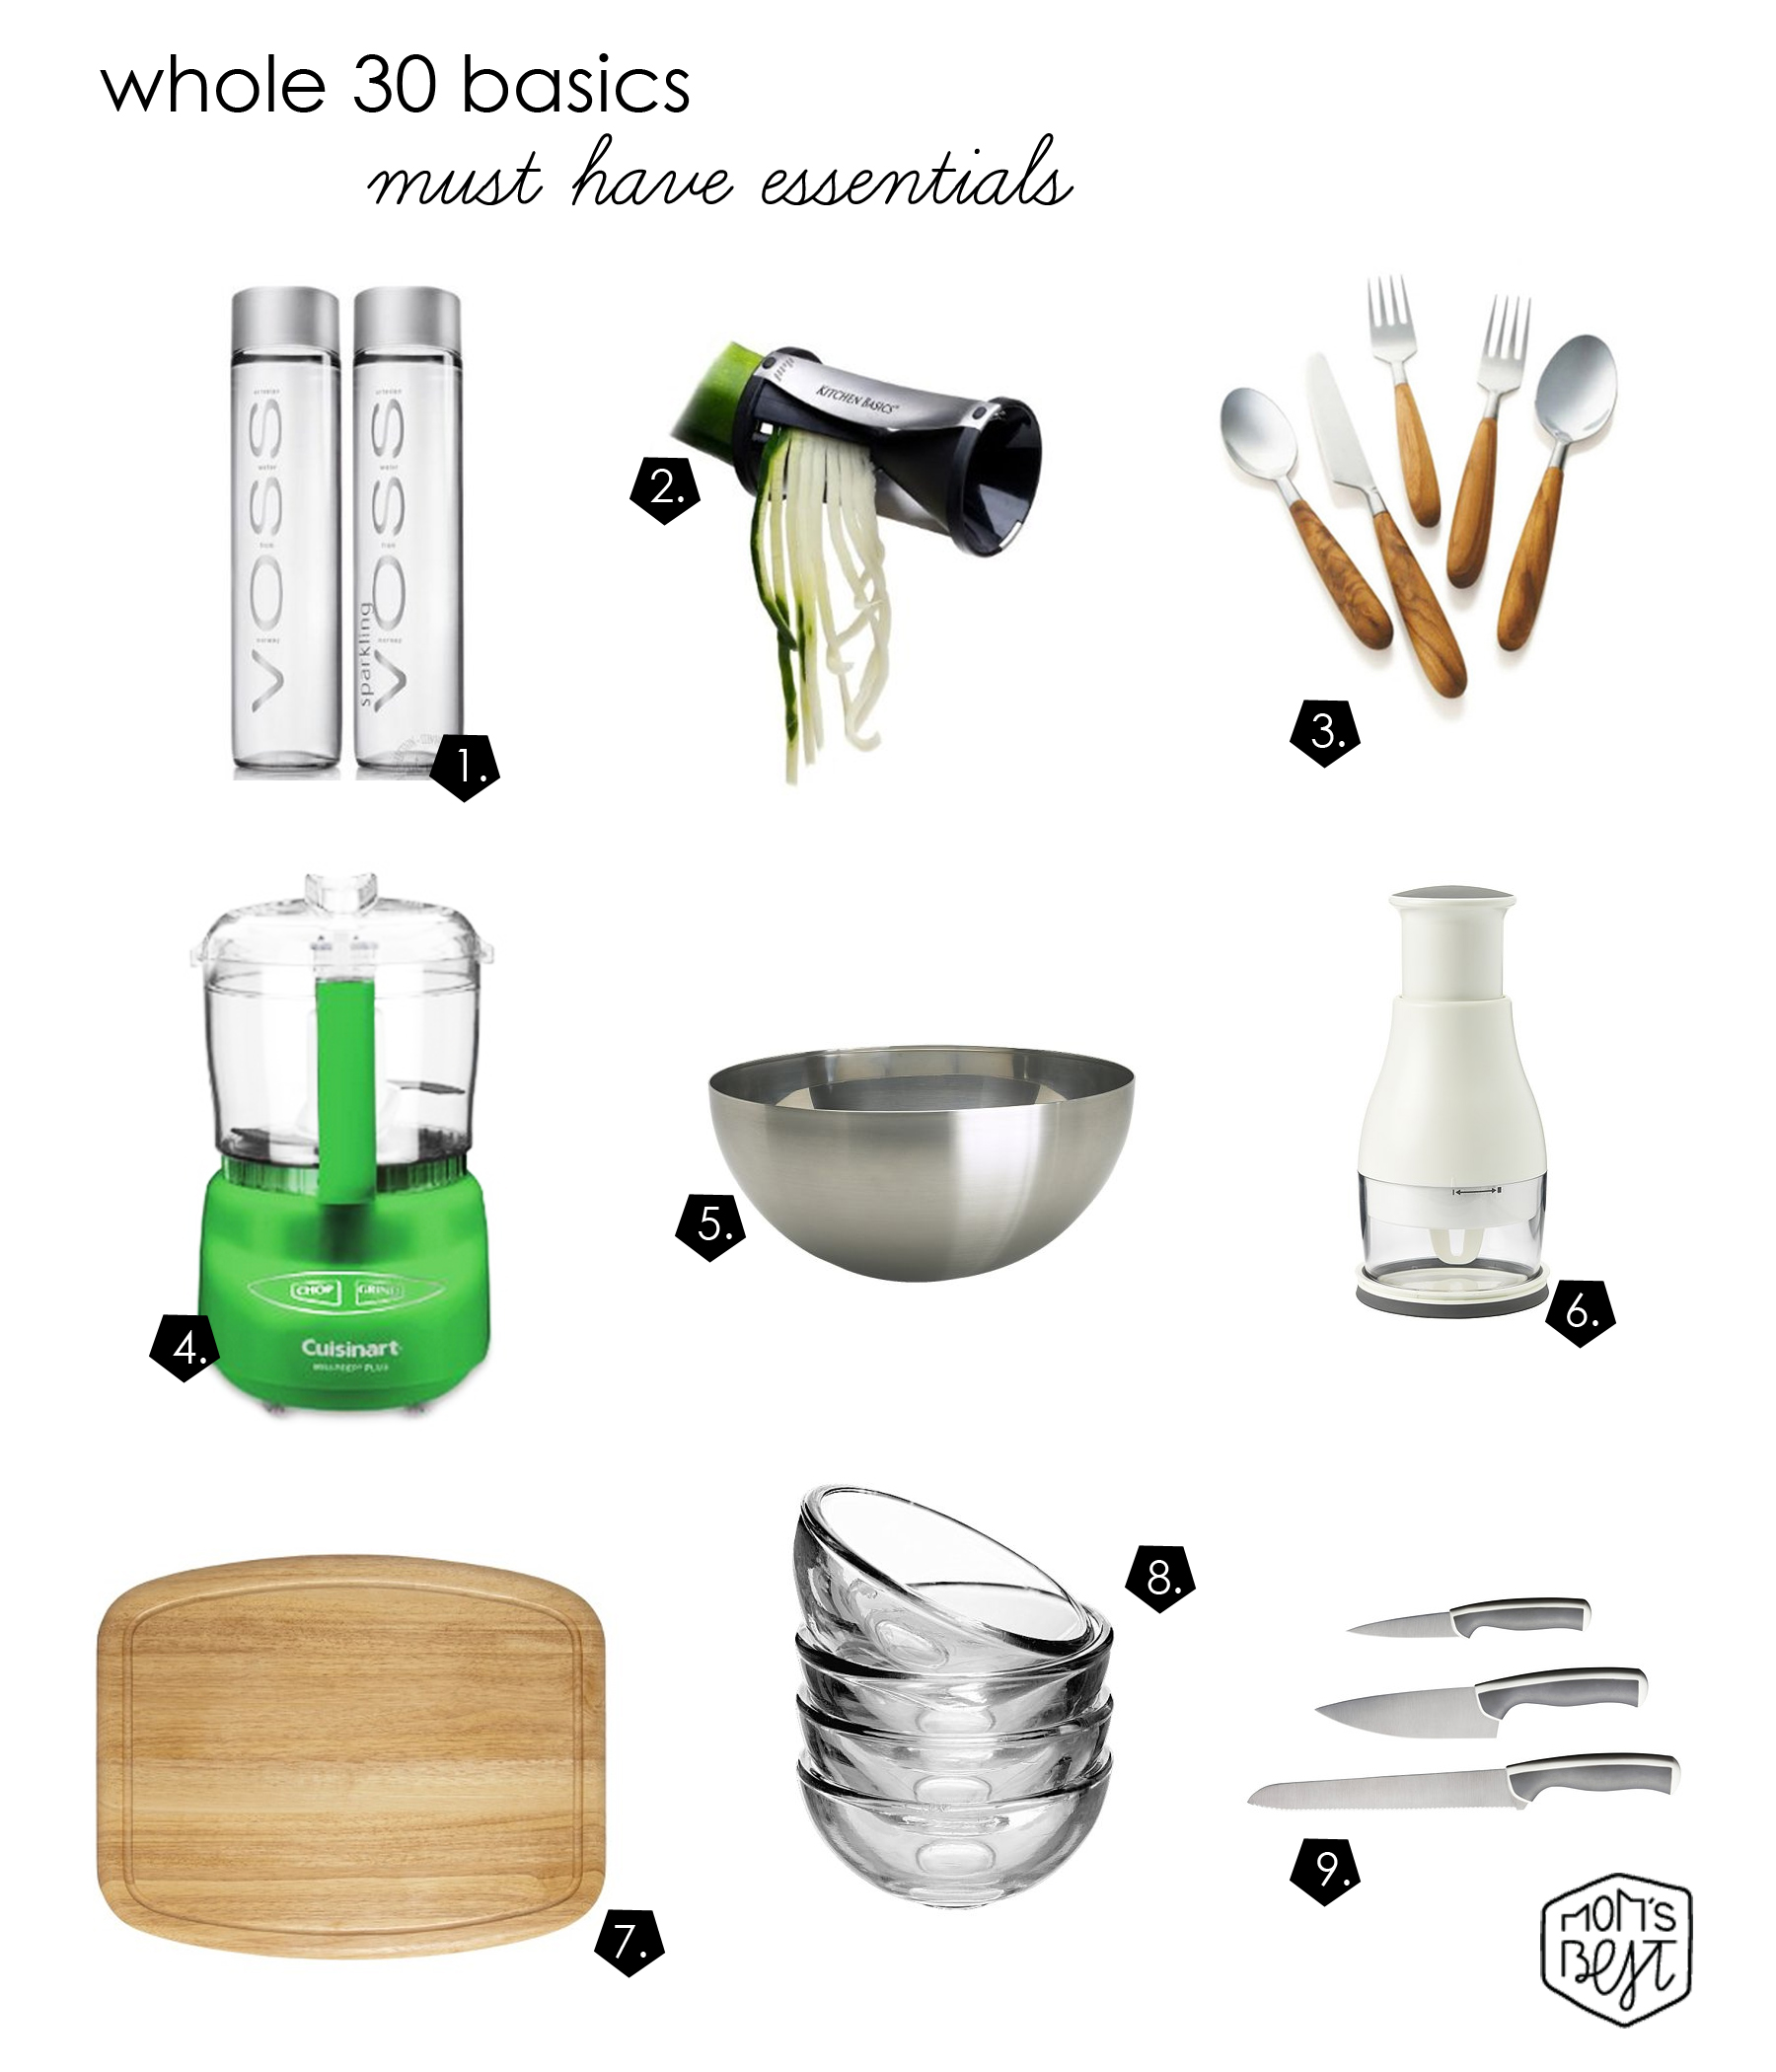 Friday find: whole 30 basics must haves